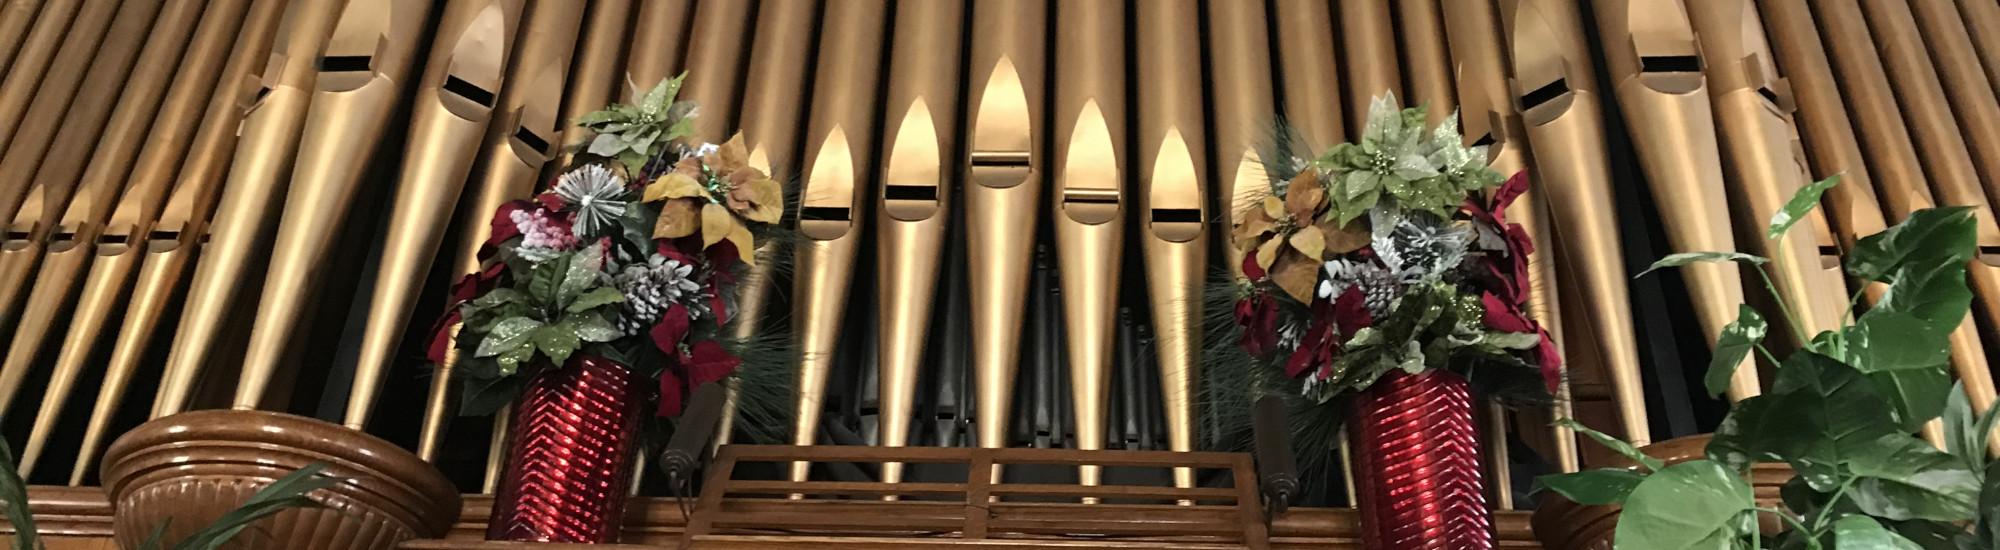 photo of the organ pipes and flowers